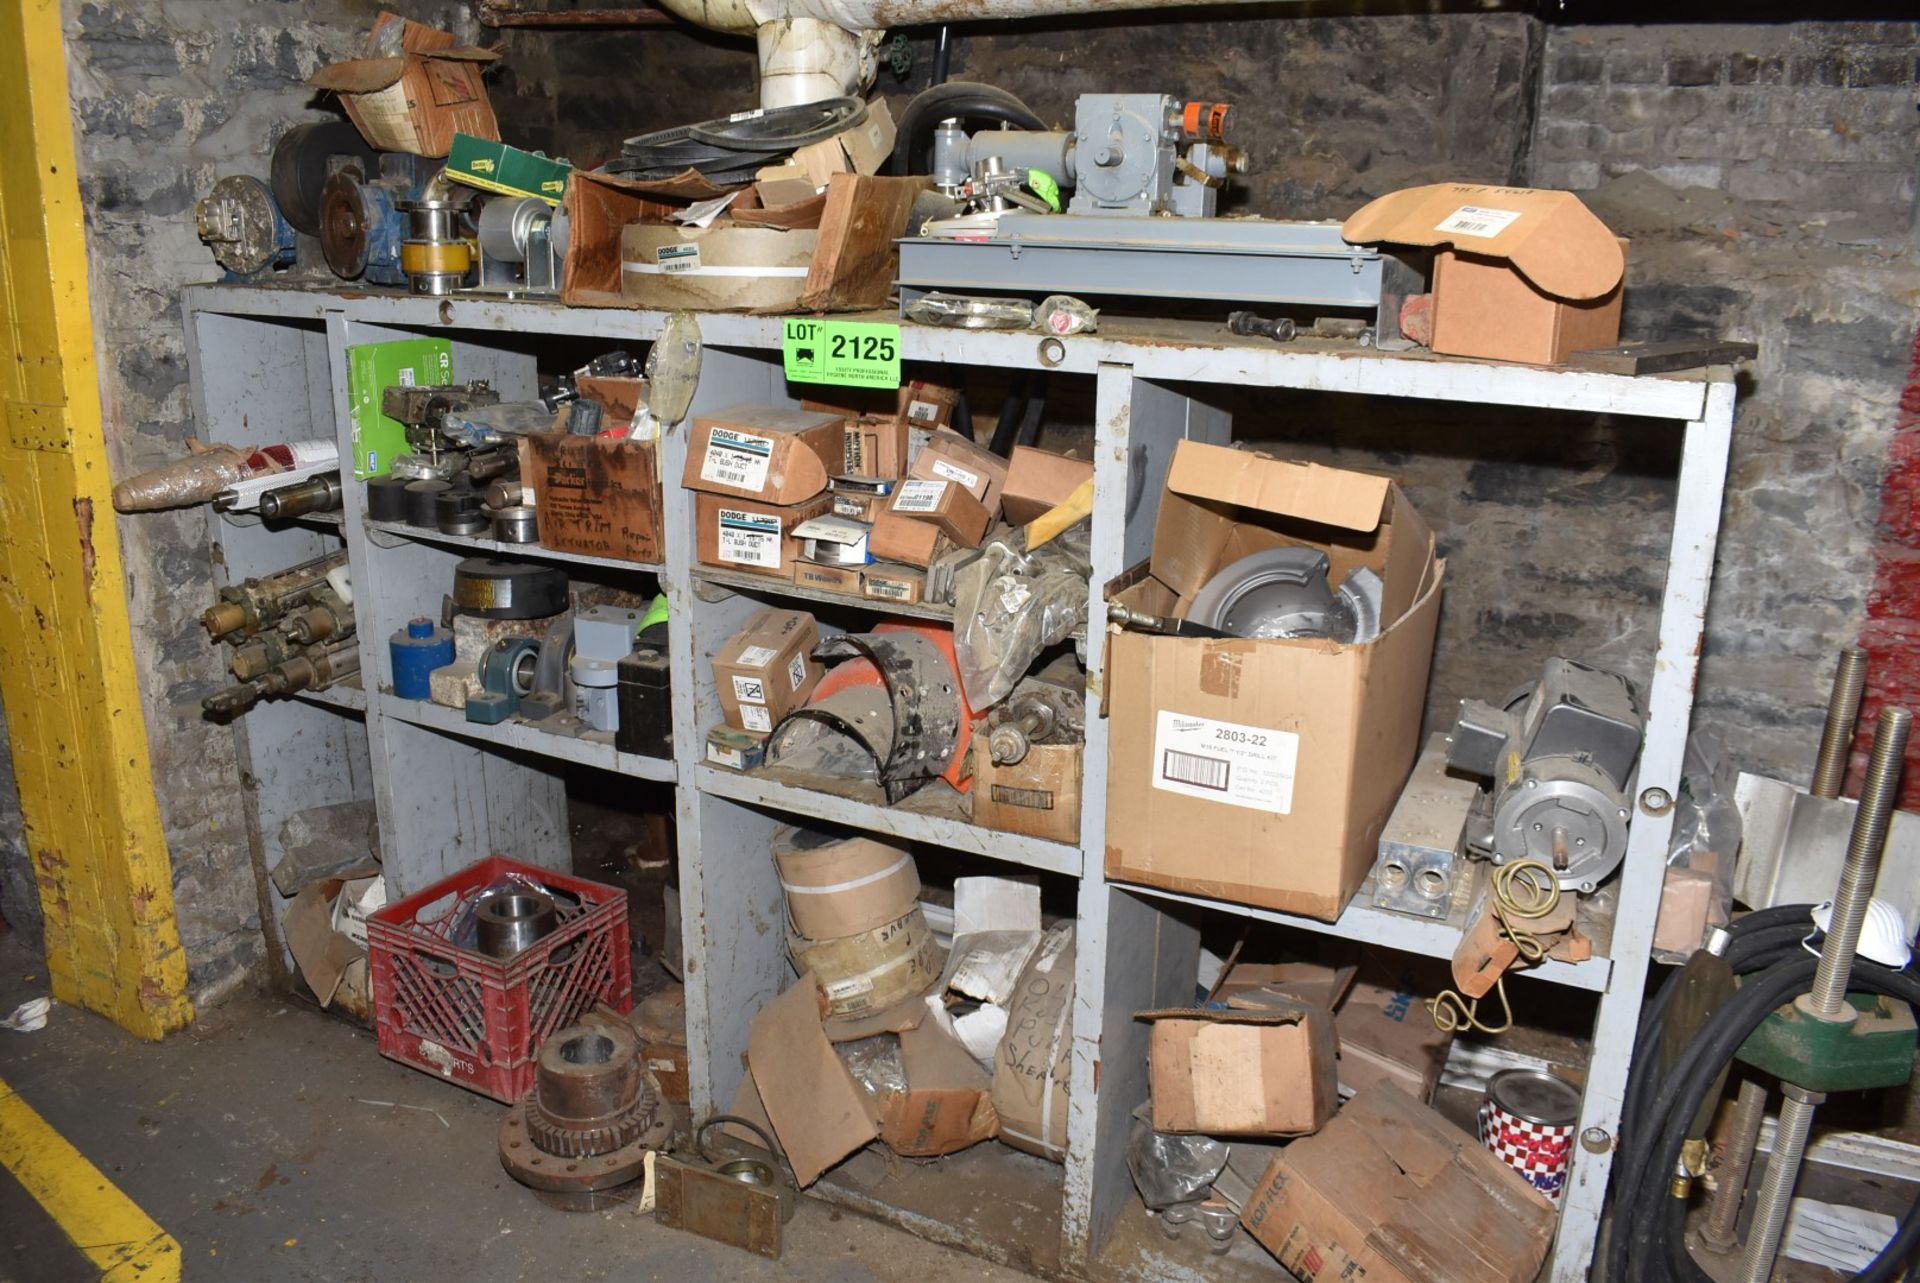 LOT/ SHELF WITH CONTENTS CONSISTING OF SPARE PARTS [RIGGING FEES FOR LOT #2125 - $TBD USD PLUS